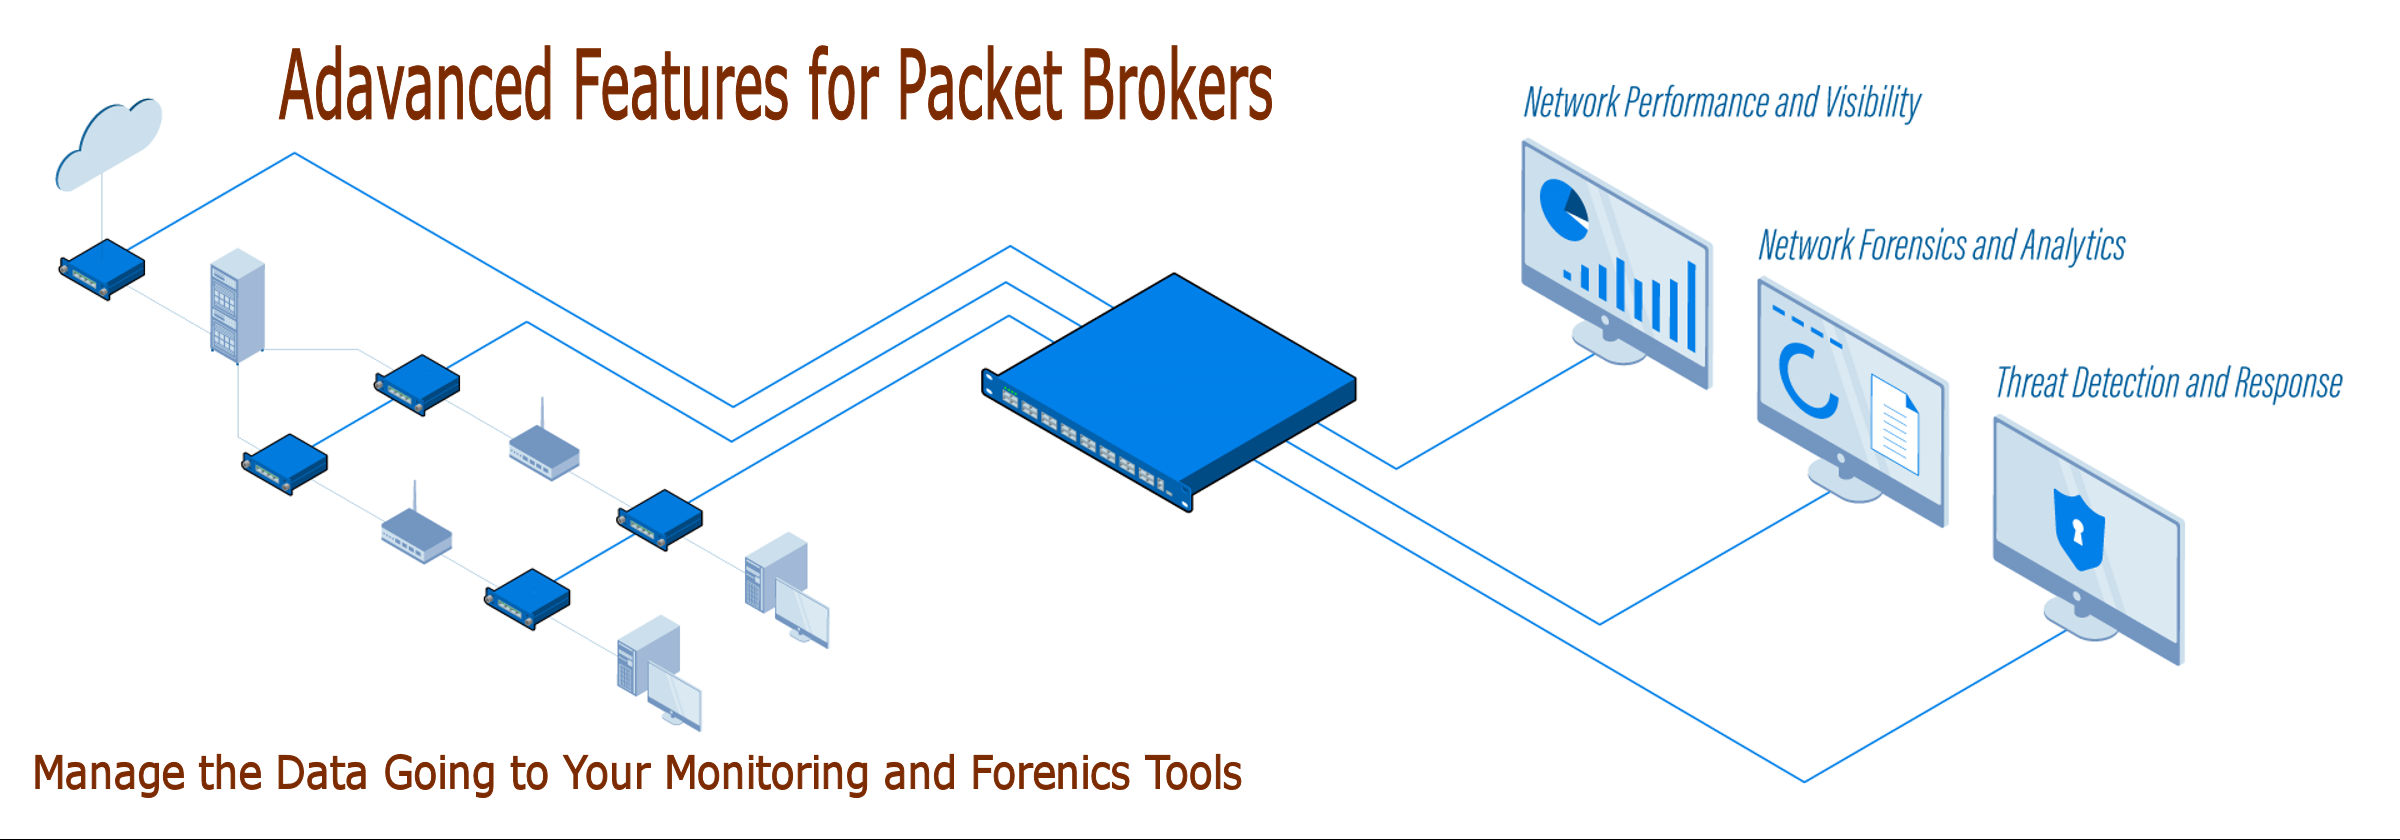 Advanced Features for Packet Brokers - manage your data to your monitoring and forensics tools